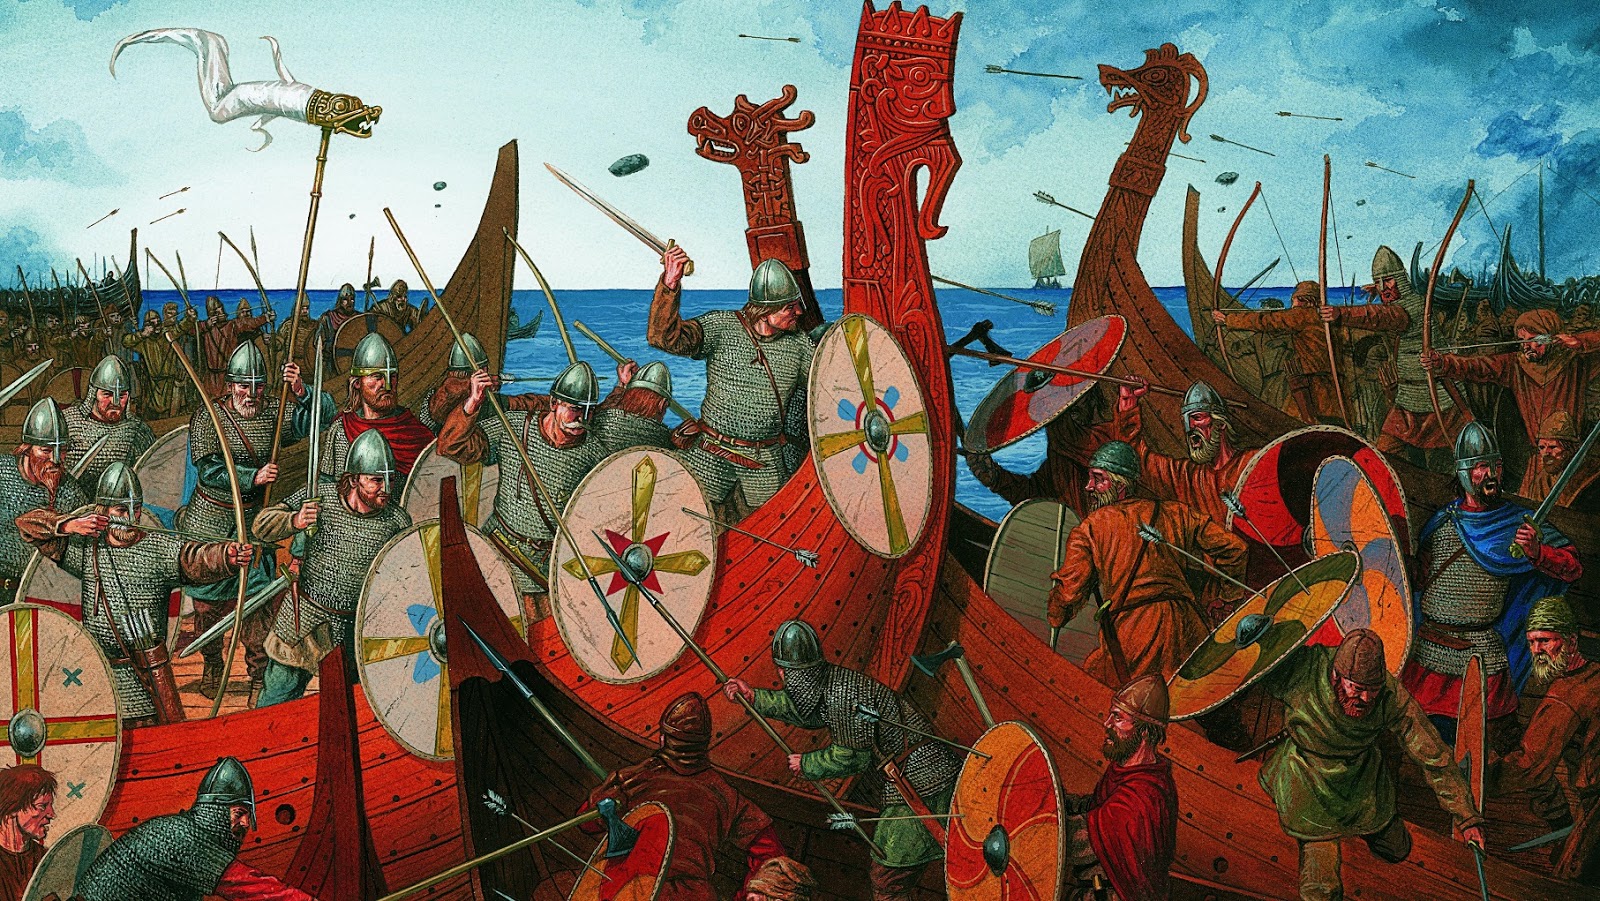 The Vikings in England (Or were they Danes?)